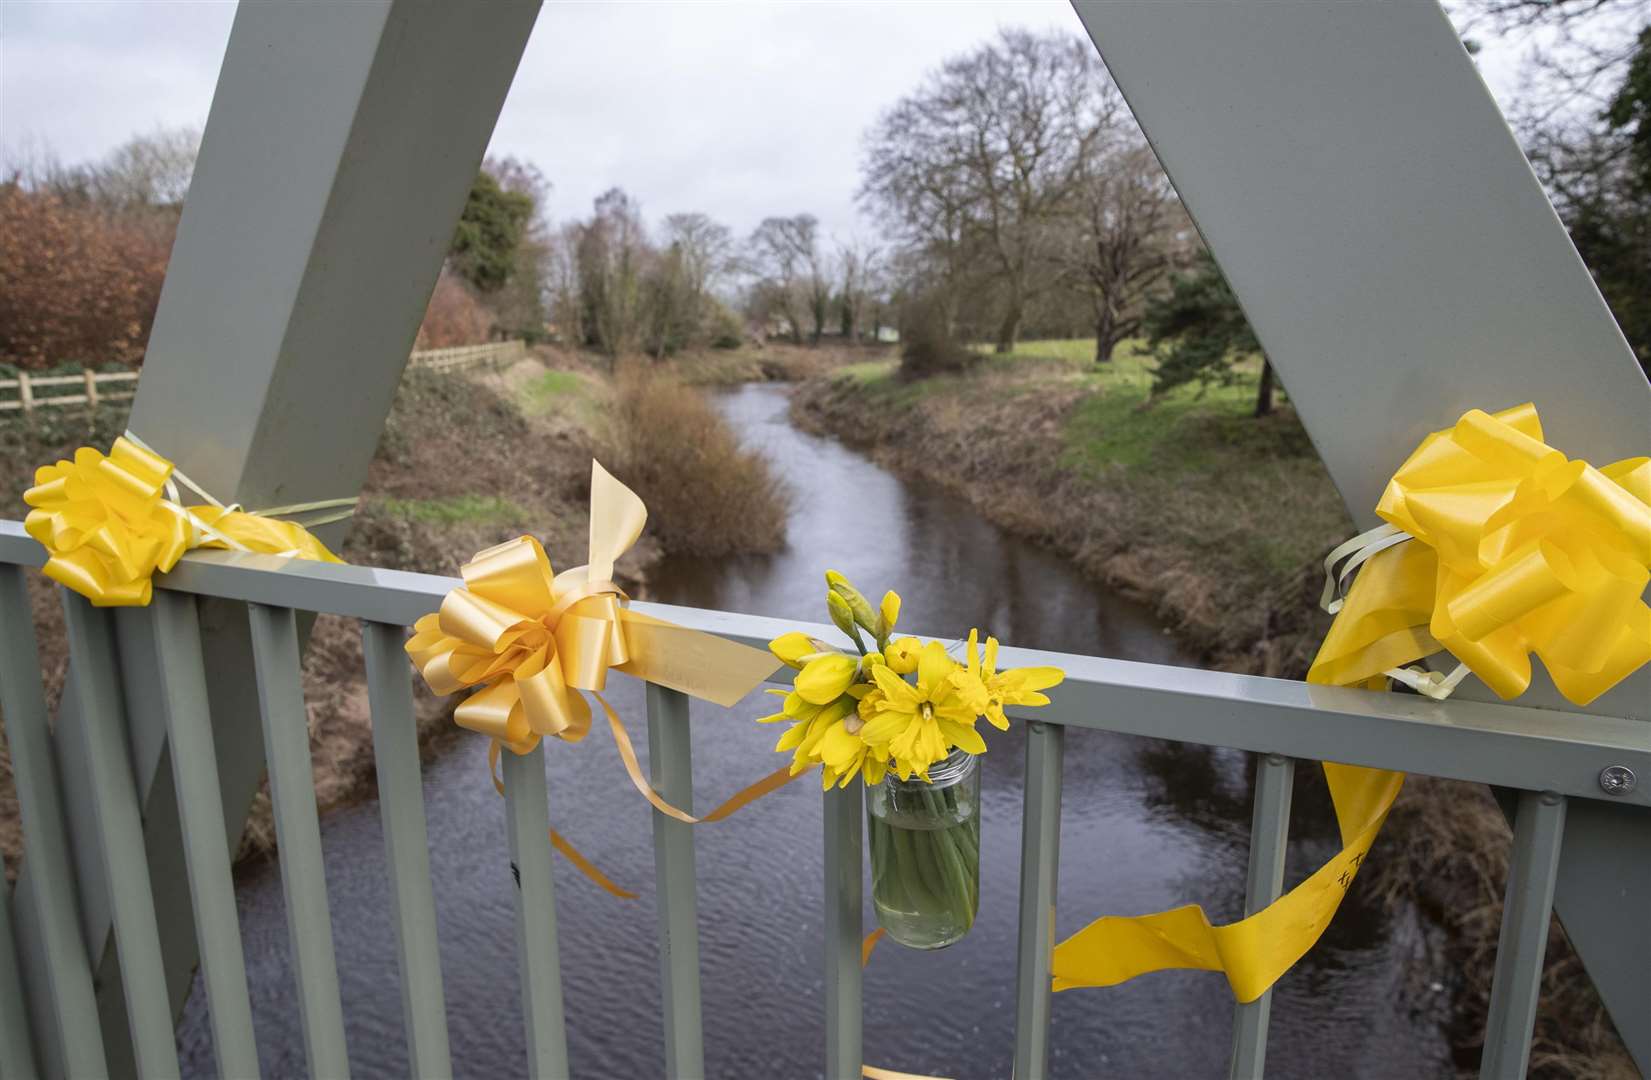 Flowers and ribbons on a bridge over the River Wyre in St Michael’s (Jason Roberts/PA)